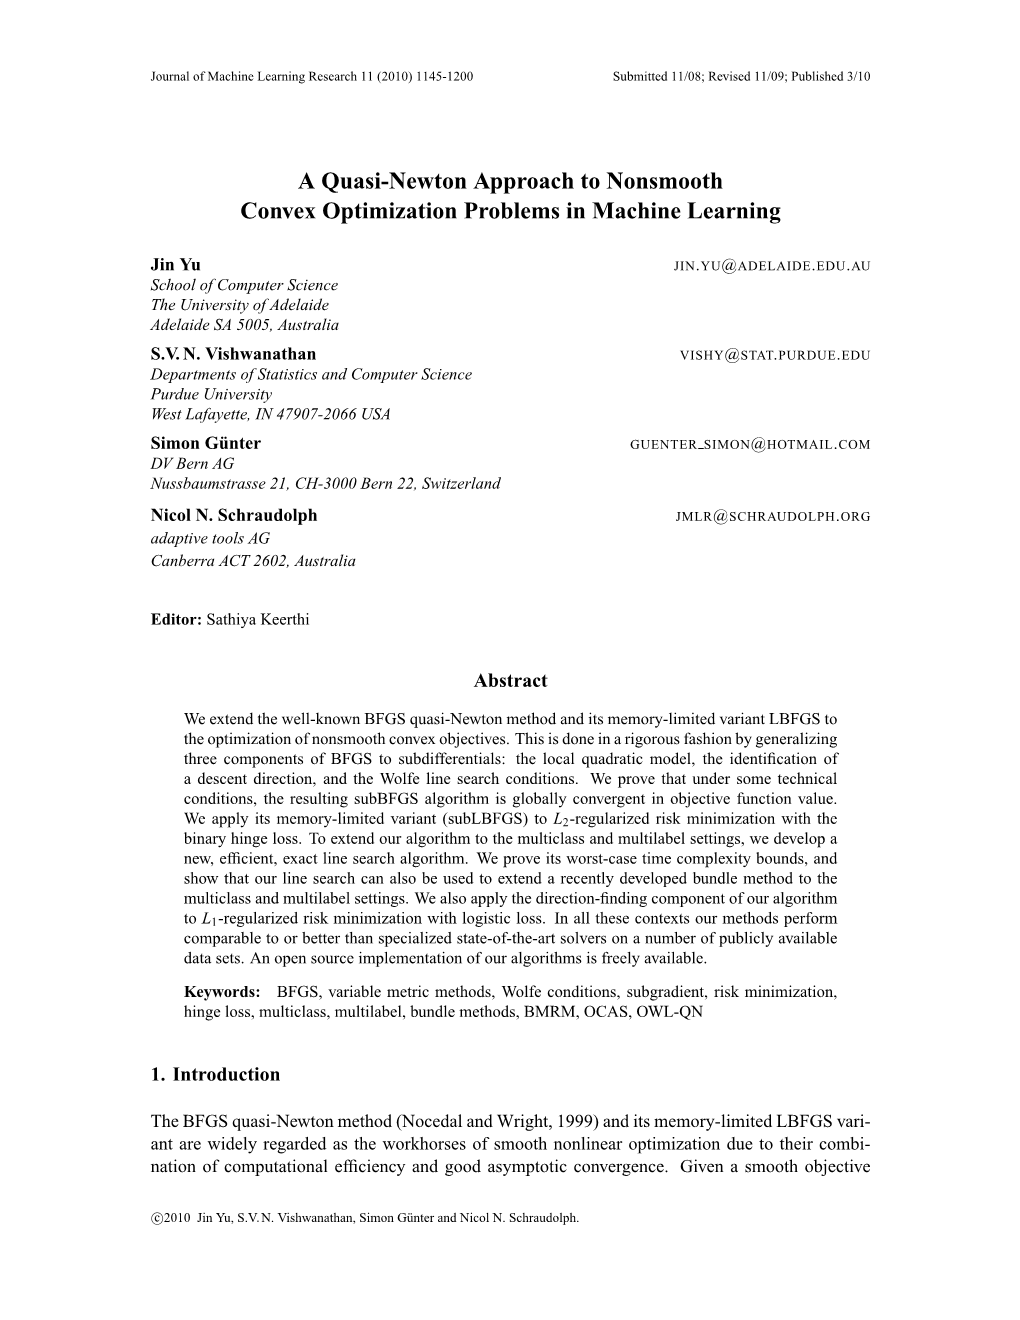 A Quasi-Newton Approach to Nonsmooth Convex Optimization Problems in Machine Learning